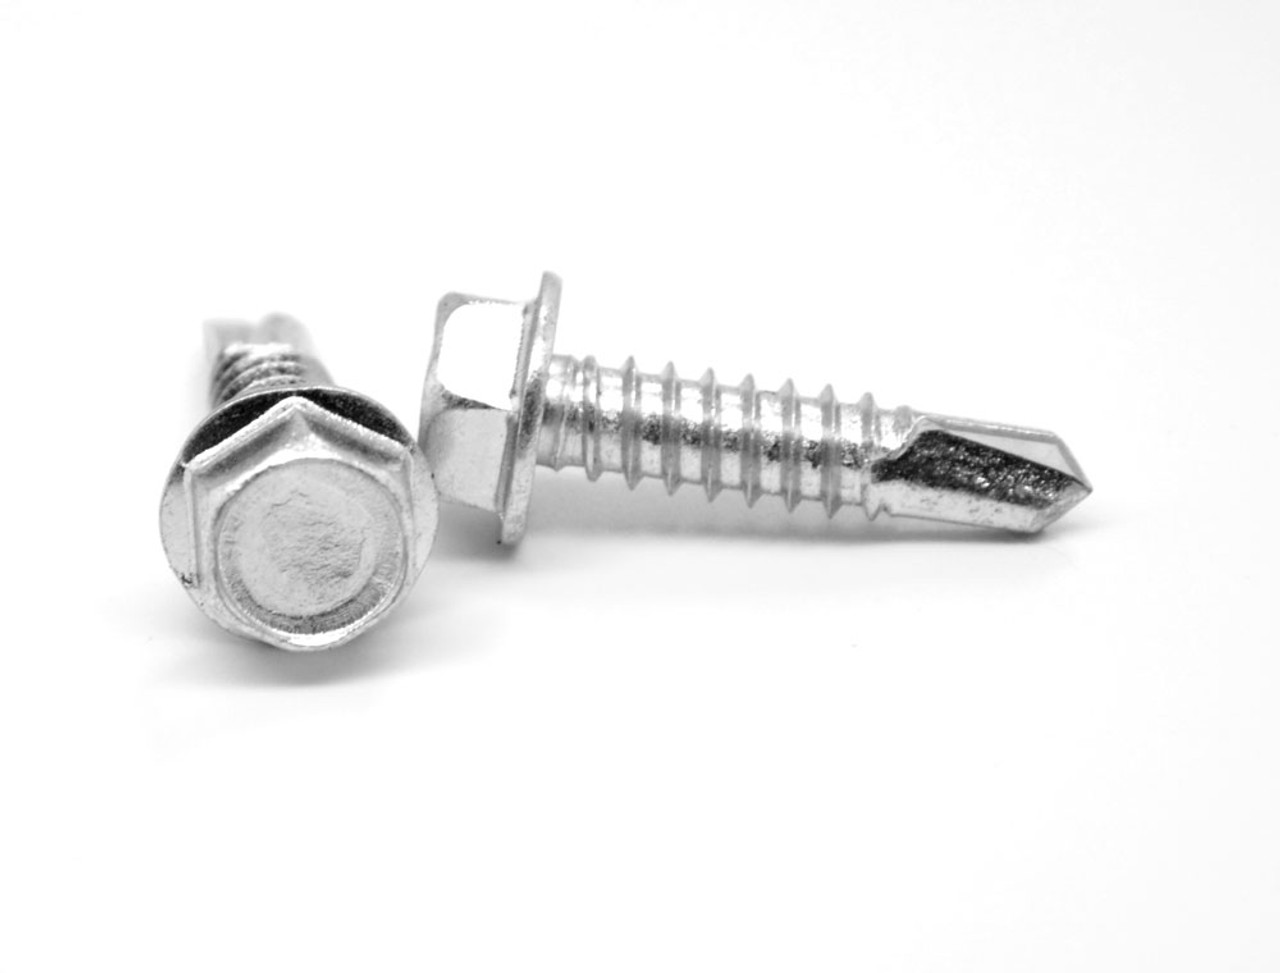 #12-24 x 3/4" (FT) Coarse Thread Self Drilling Screw Hex Washer Head #3 Point Stainless Steel 18-8